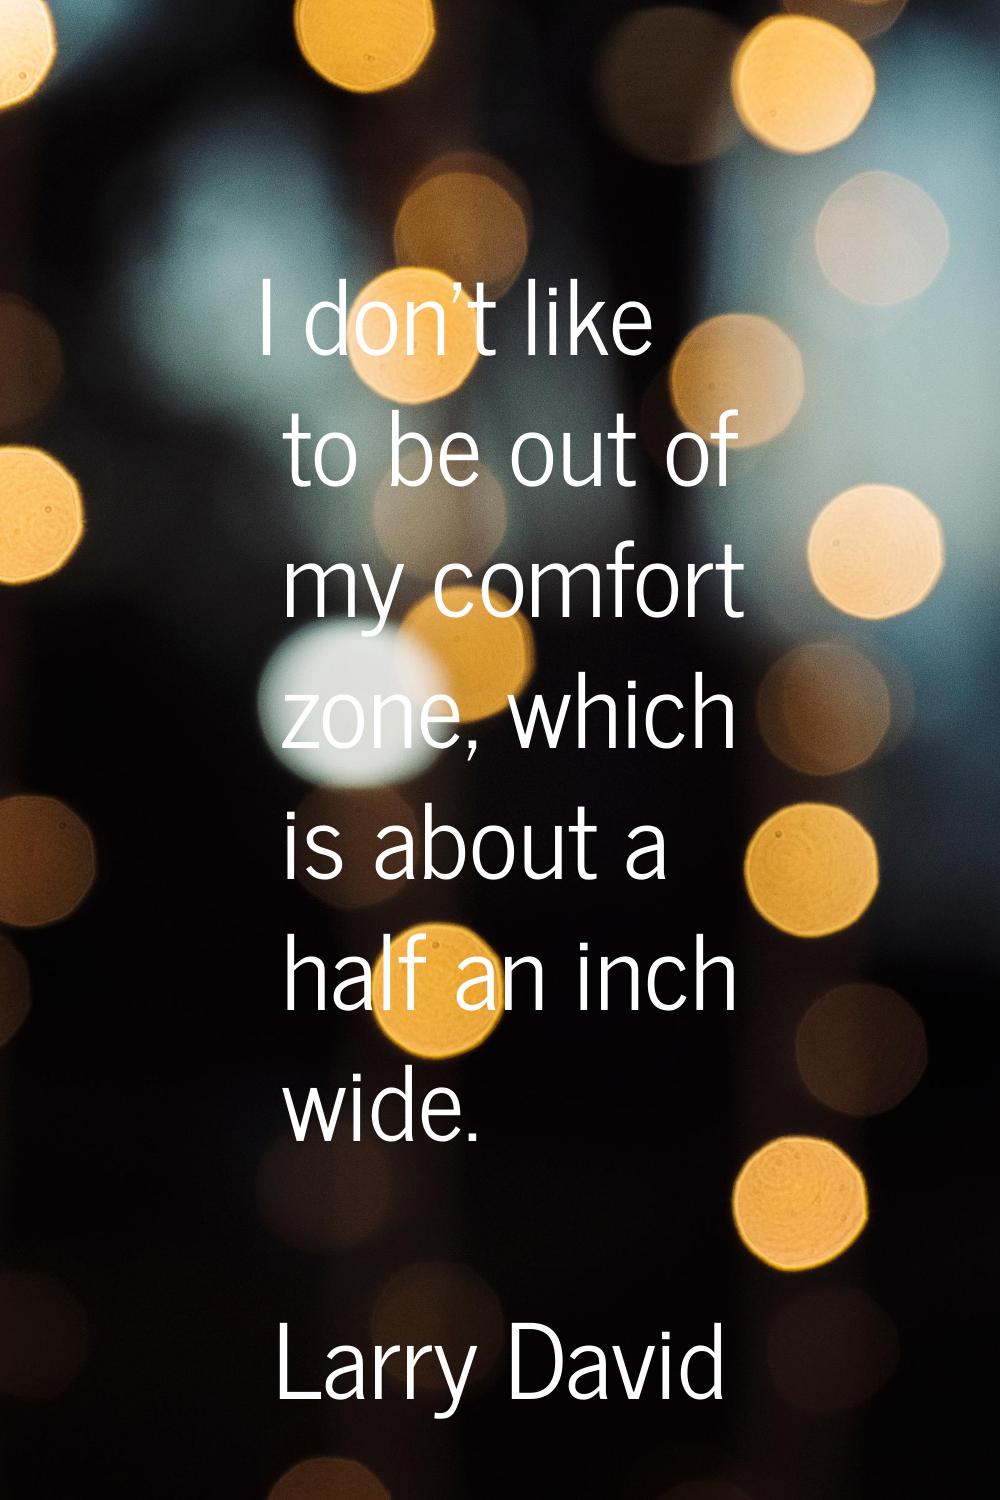 I don't like to be out of my comfort zone, which is about a half an inch wide.